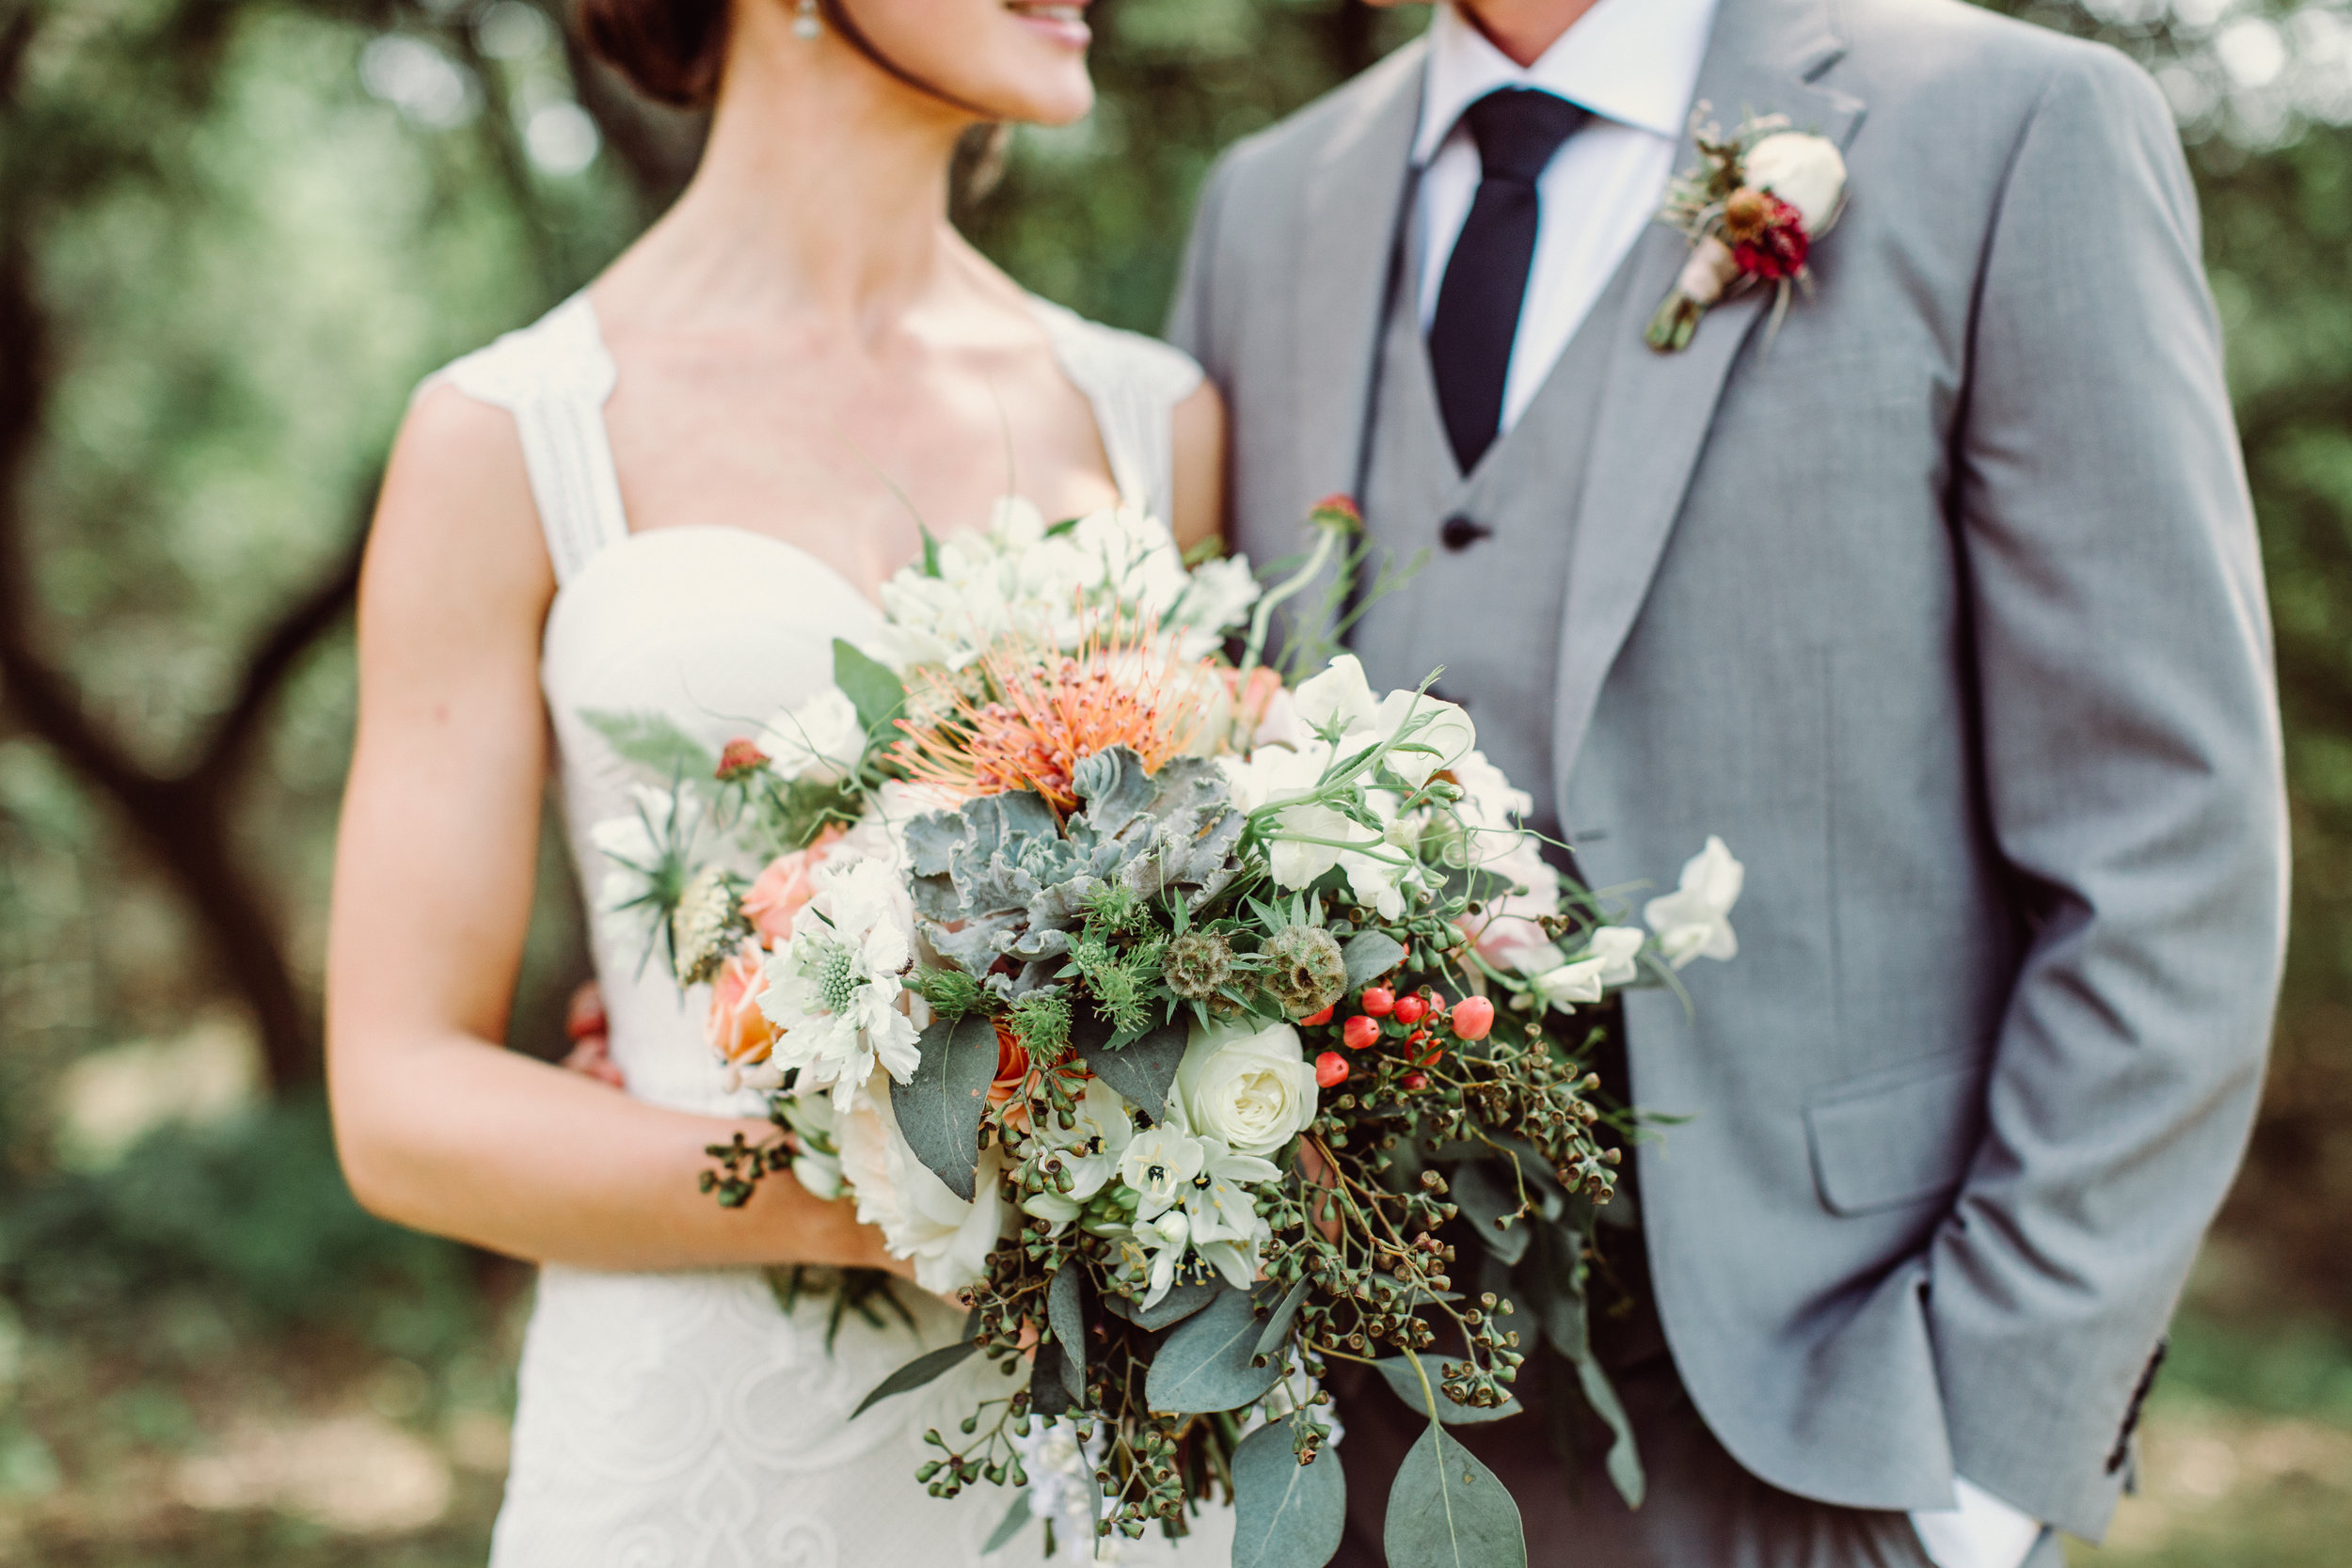  Bohemian style white with pops of orange and succulent bridal bouquet at The Creek Haus. Petal Pushers floral event design studio located in Dripping Springs, Texas. 